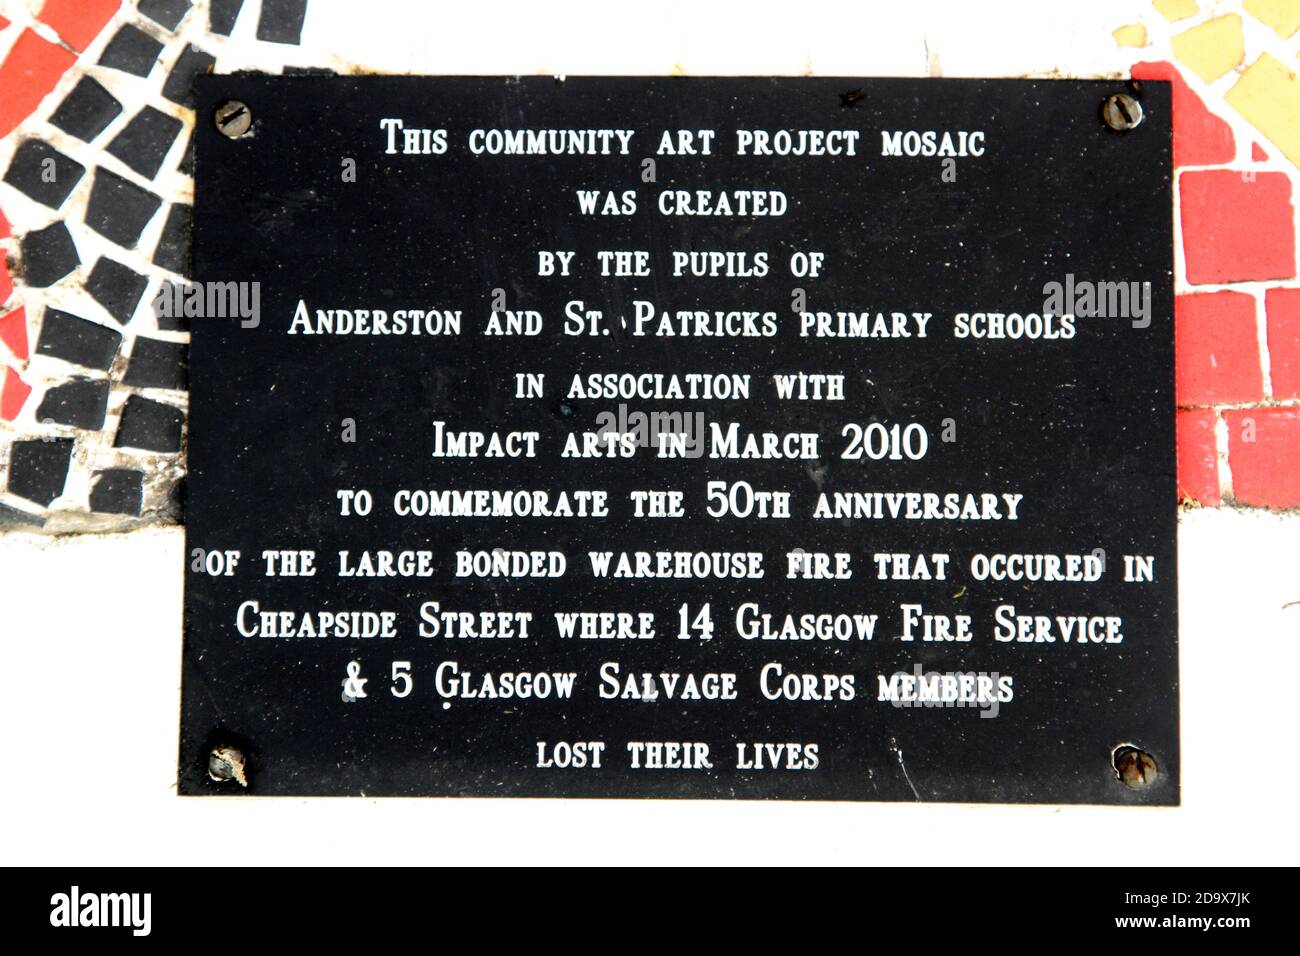 Cheapside Glasgow, Scotland.  Mosaic commemorating fire at Cheapside where 14 firefighters and 5 Salvage corp members lost thier life The Cheapside Street whisky bond fire in Glasgow on 28 March 1960 was Britain's worst peacetime fire services disaster. The fire at a whisky bond killed 14 fire service and 5 salvage corps personnel. The mosaic mural, created by the pupils of nearby Anderston & St. Patricks primary Stock Photo